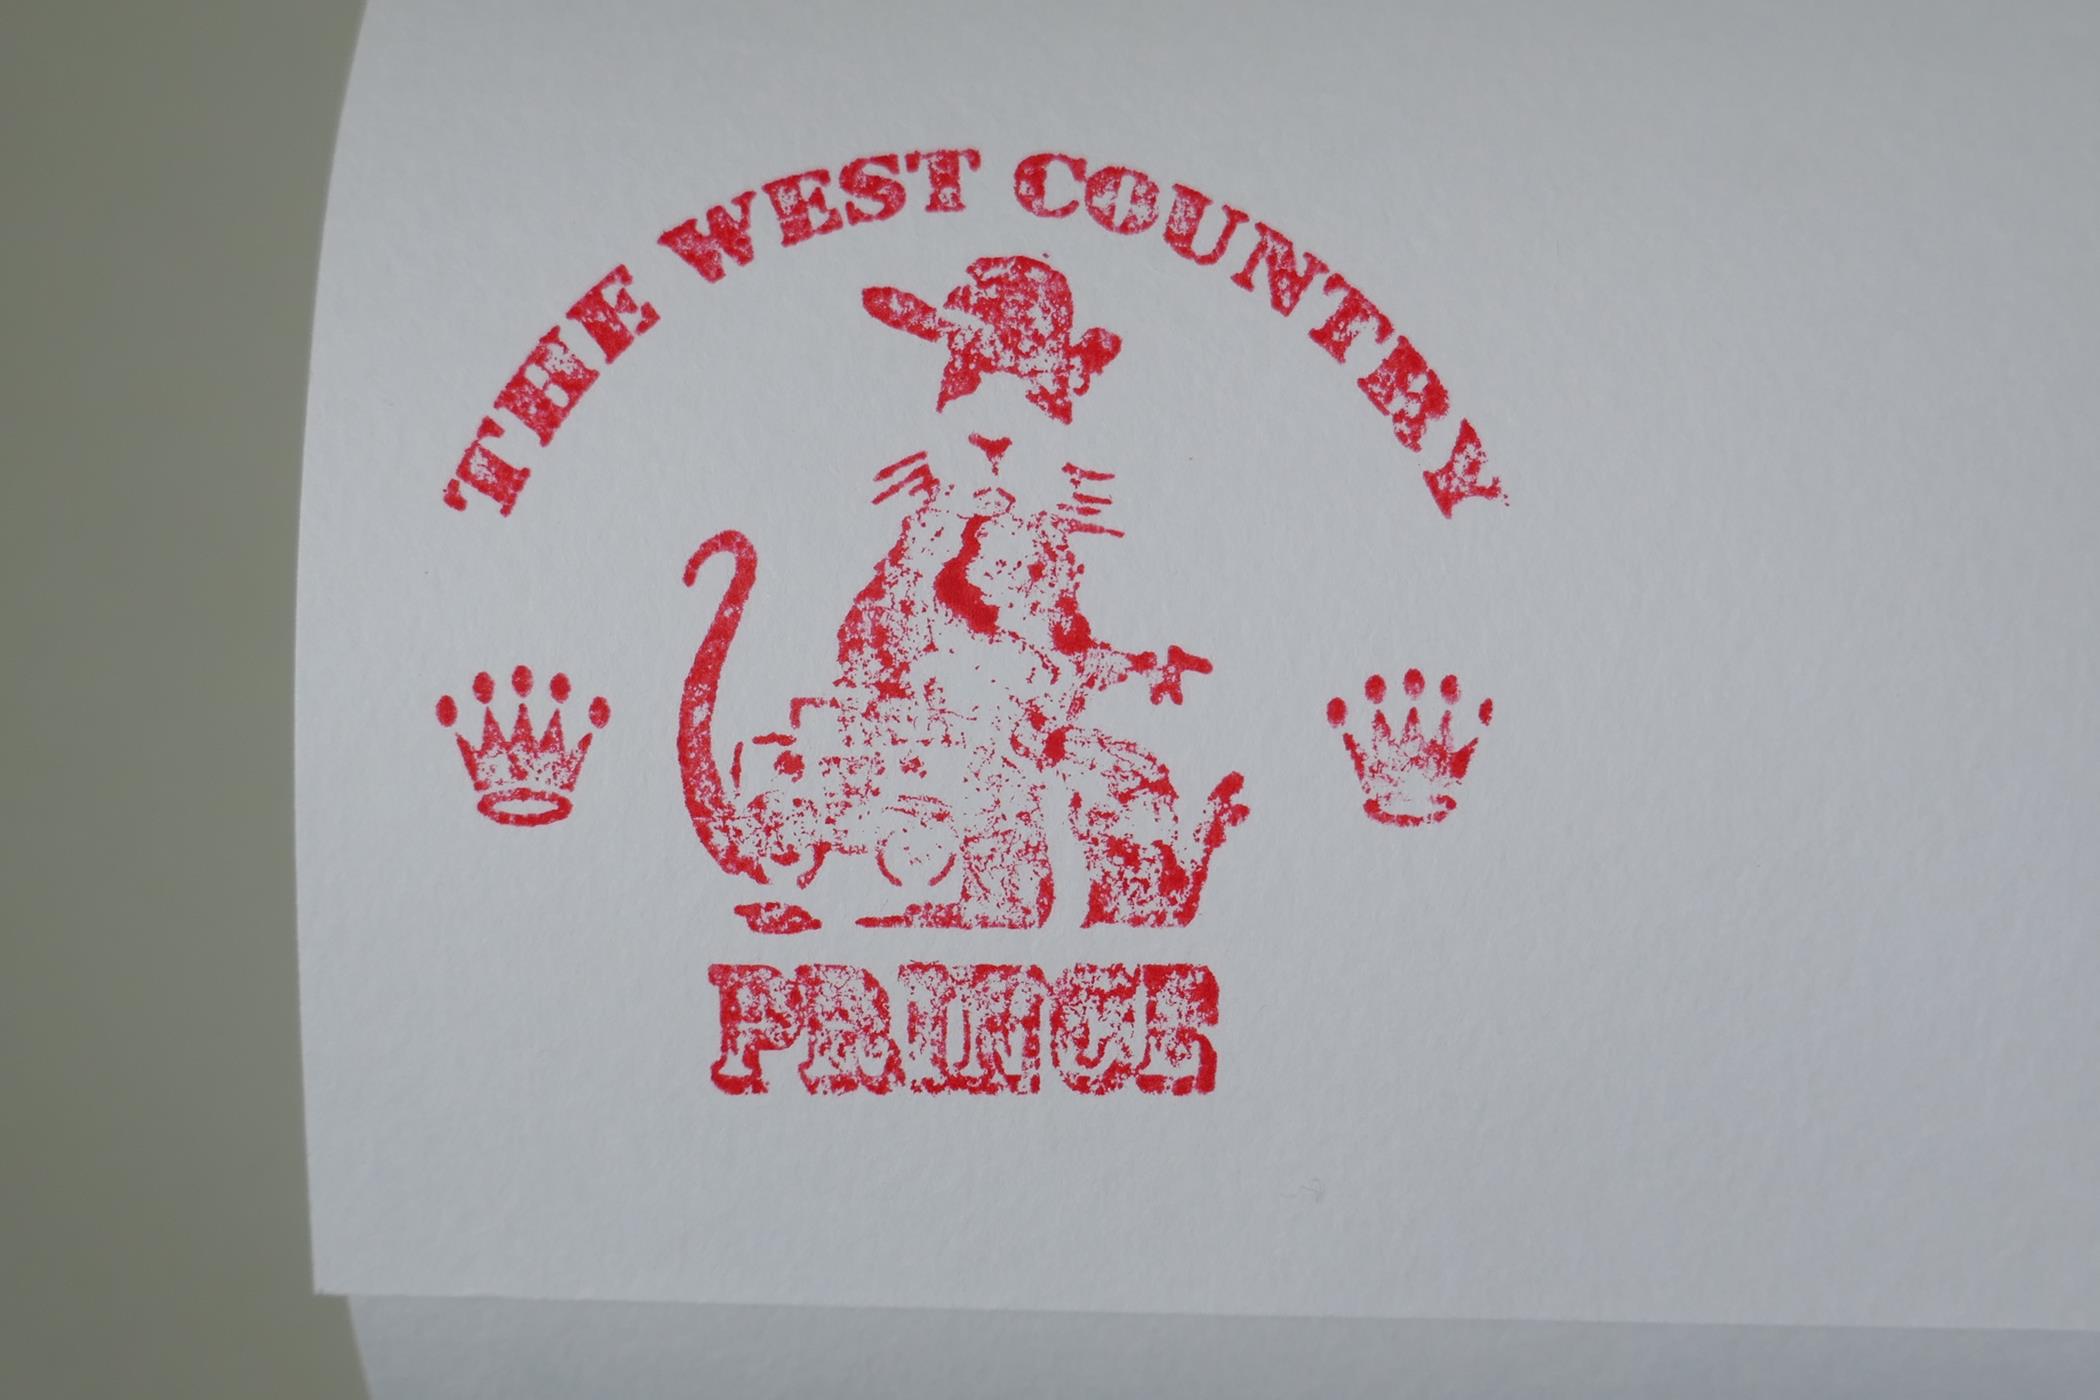 After Banksy, Kate Moss, limited edition copy screen print No 290/500, by the West Country Prince, - Image 4 of 4